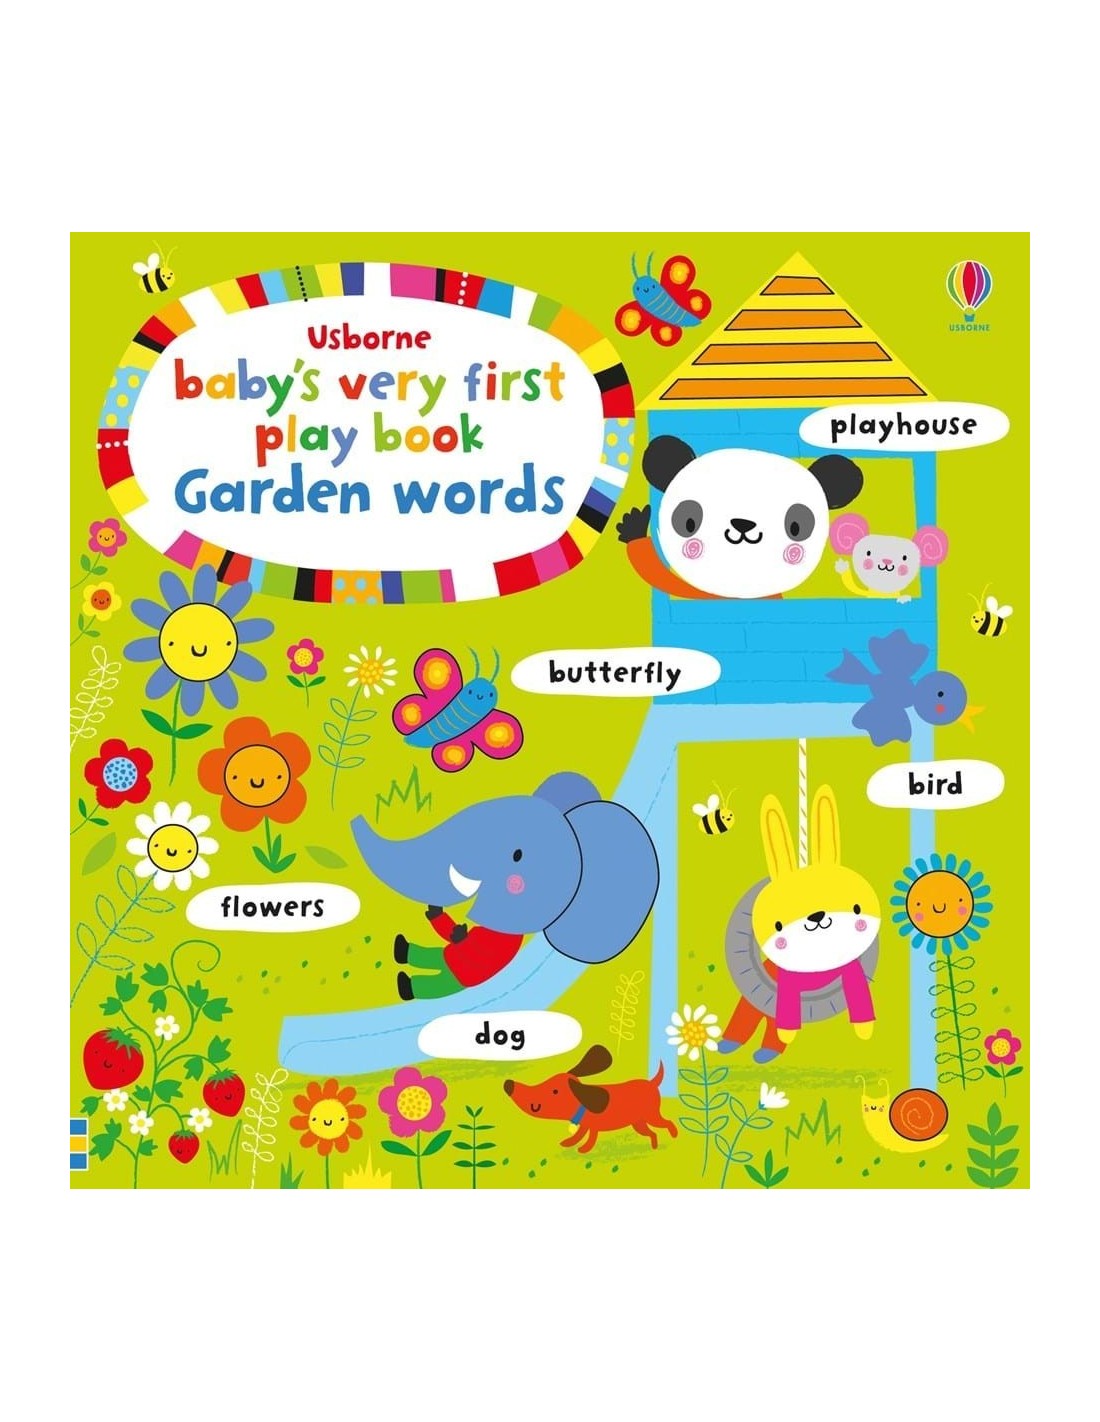 Baby's very first play book garden words